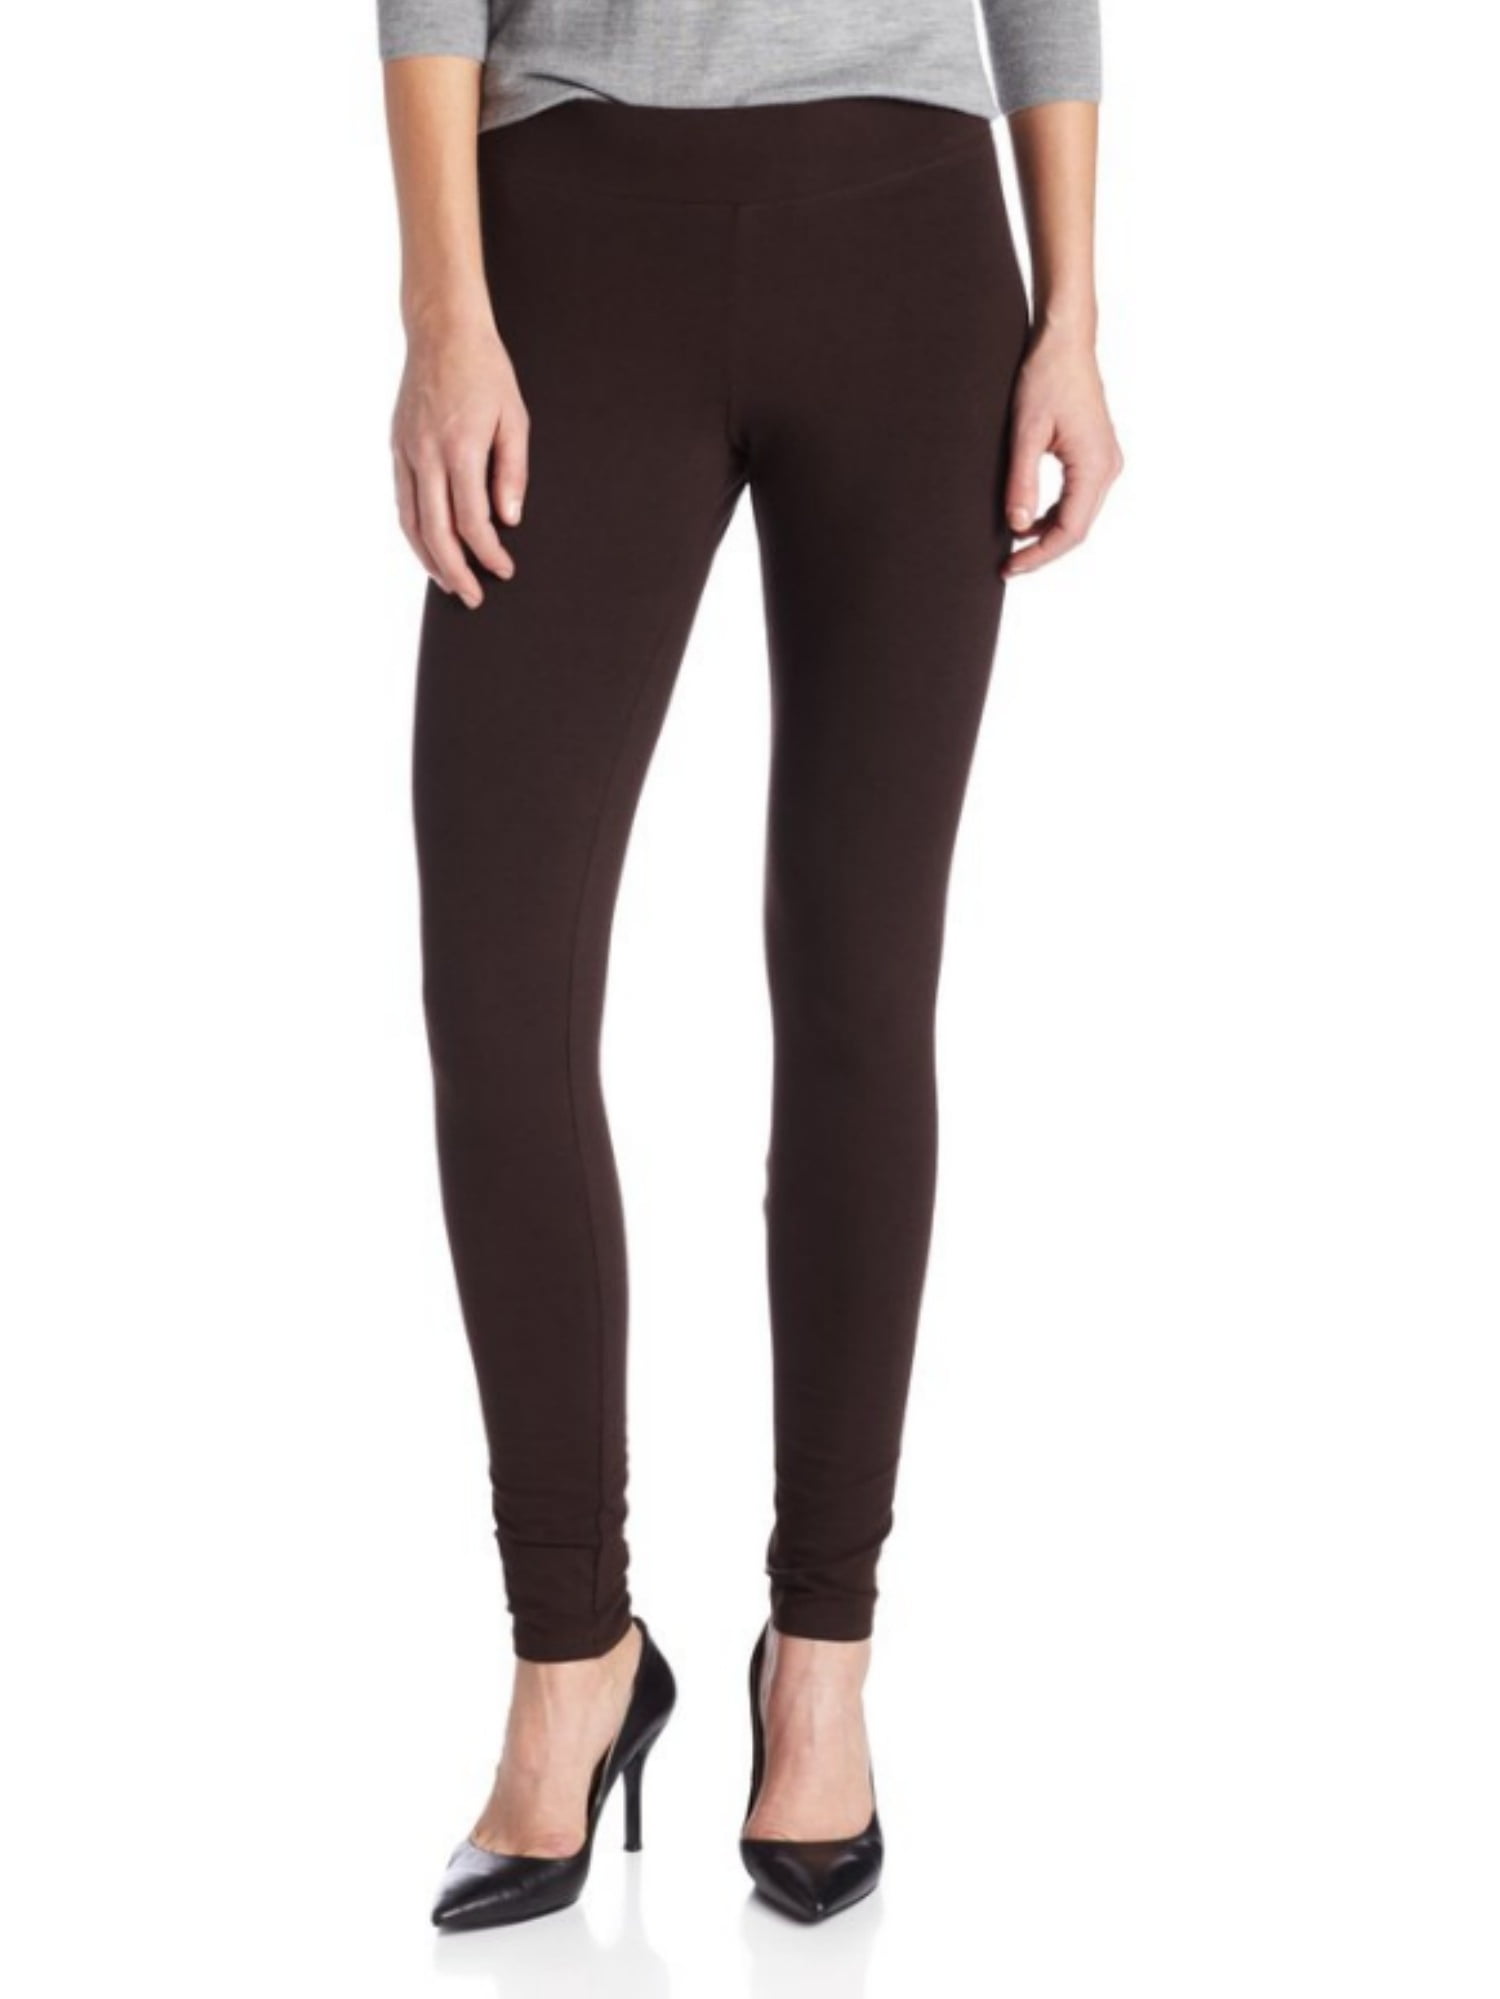 Women's High-waisted Classic Leggings - Wild Fable™ Deep Olive 2x